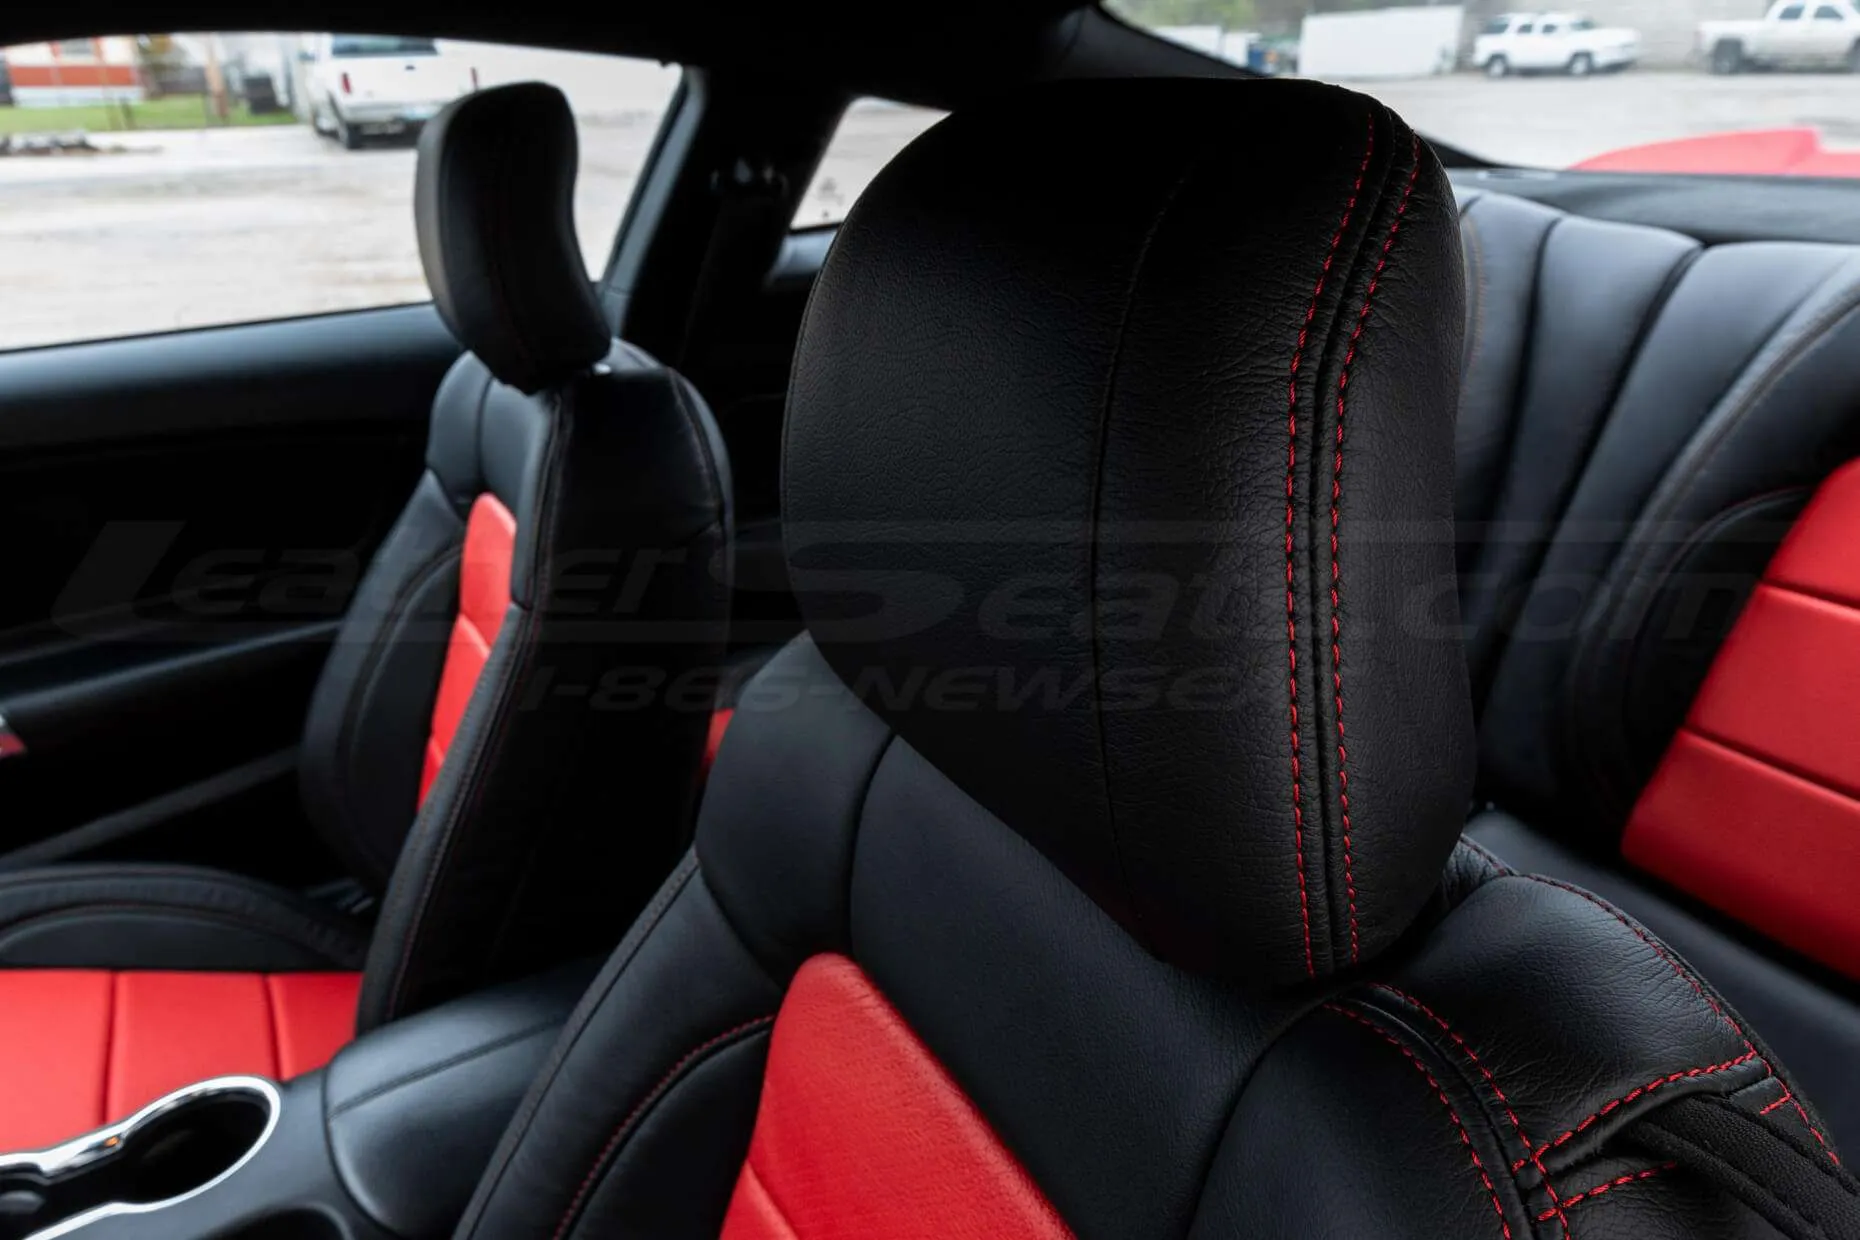 Ford Mustang installed leather kit - Black & Bright Red - Headrest & Double-stitching